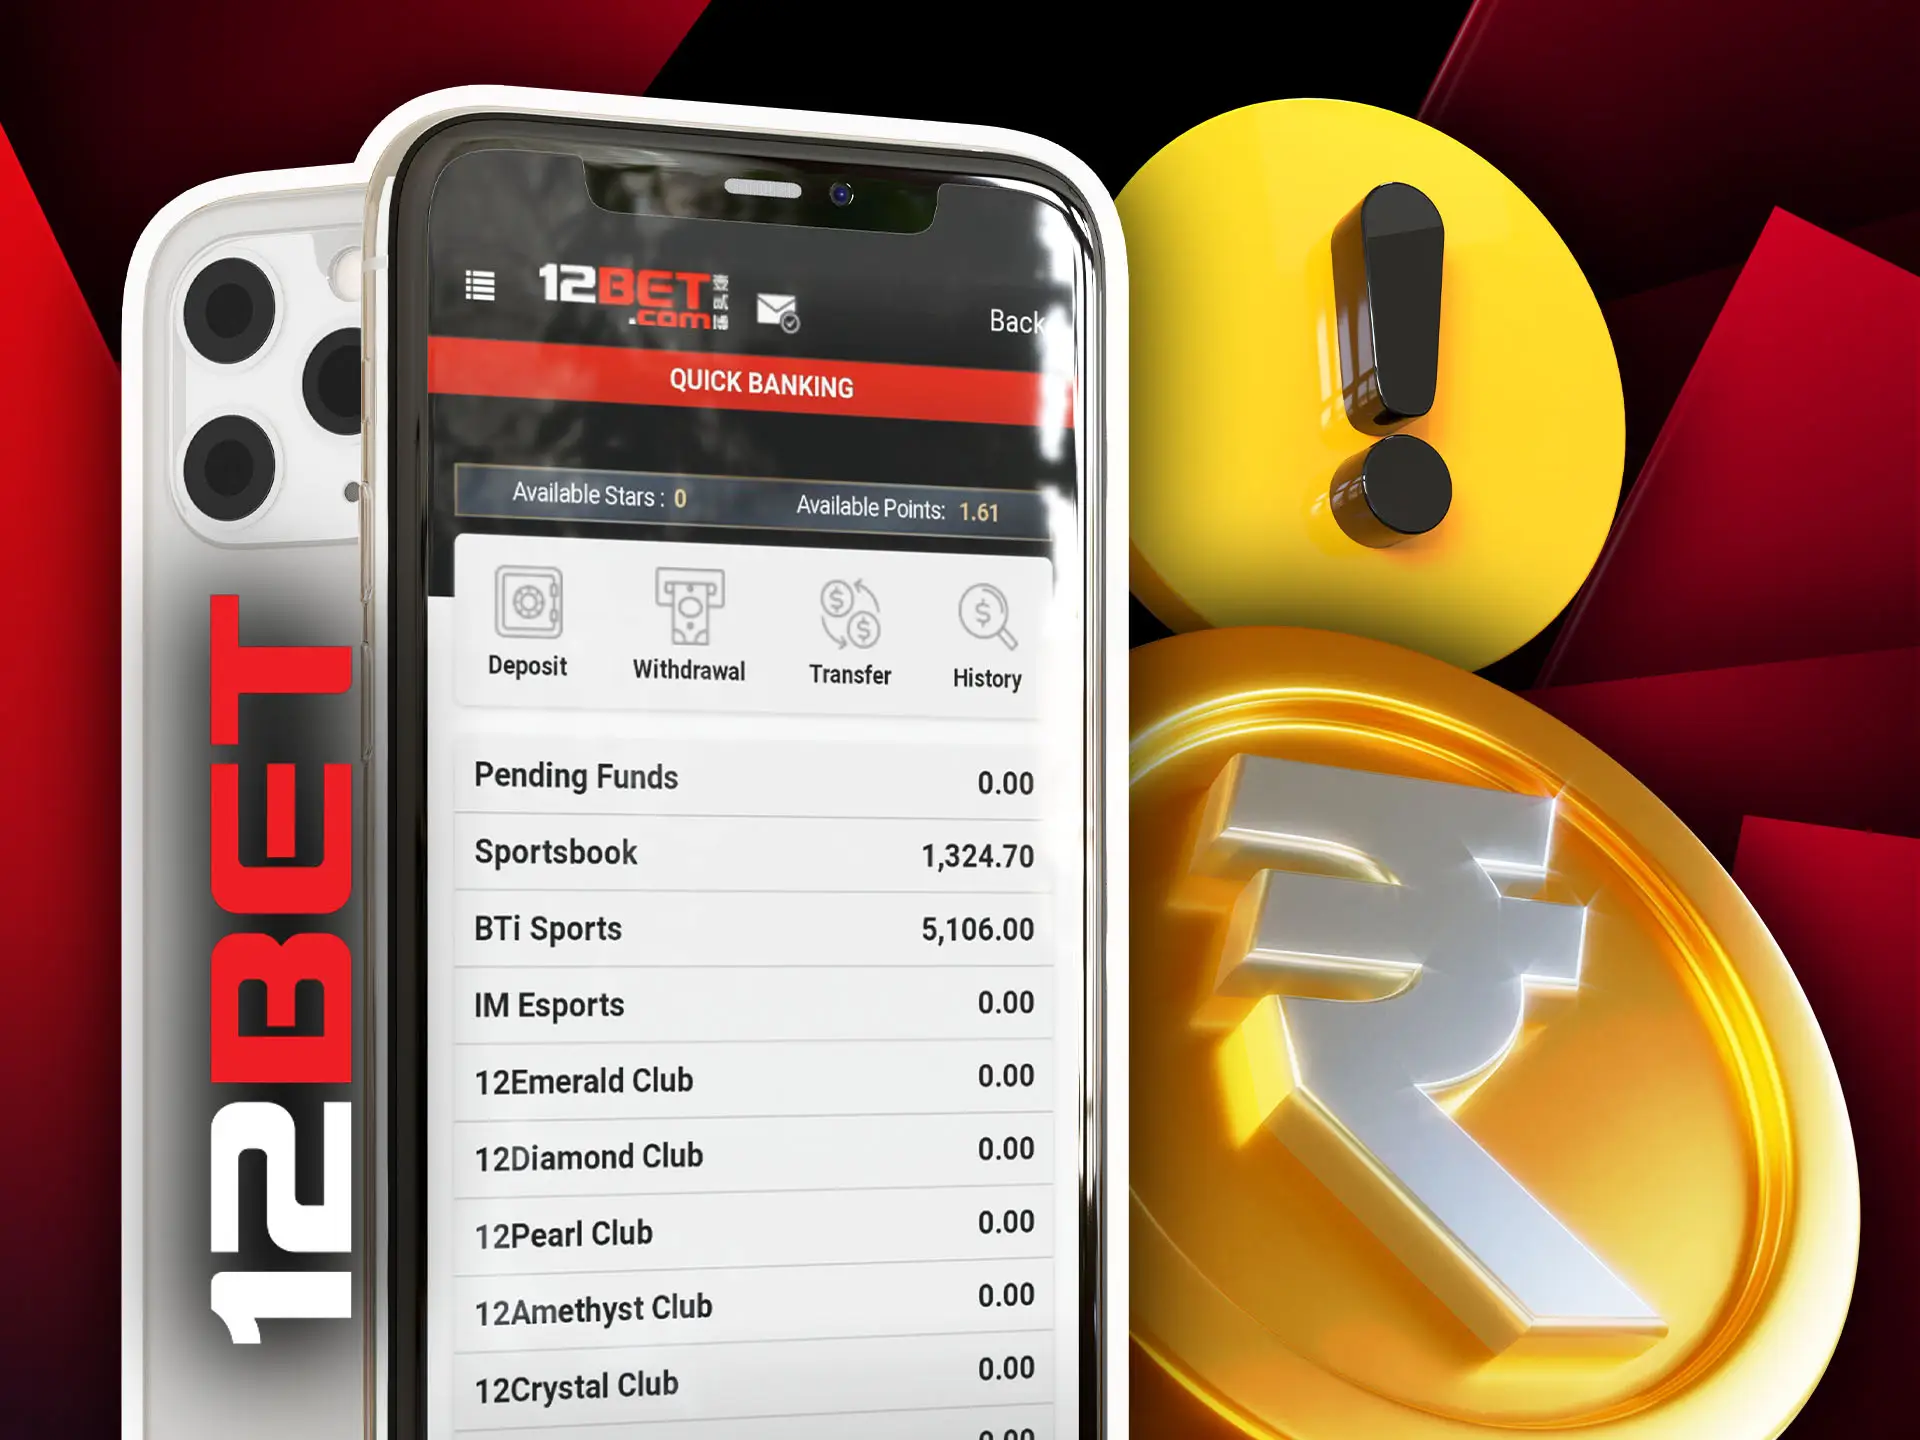 Check 12bet withdrawal rules before making the withdrawal.